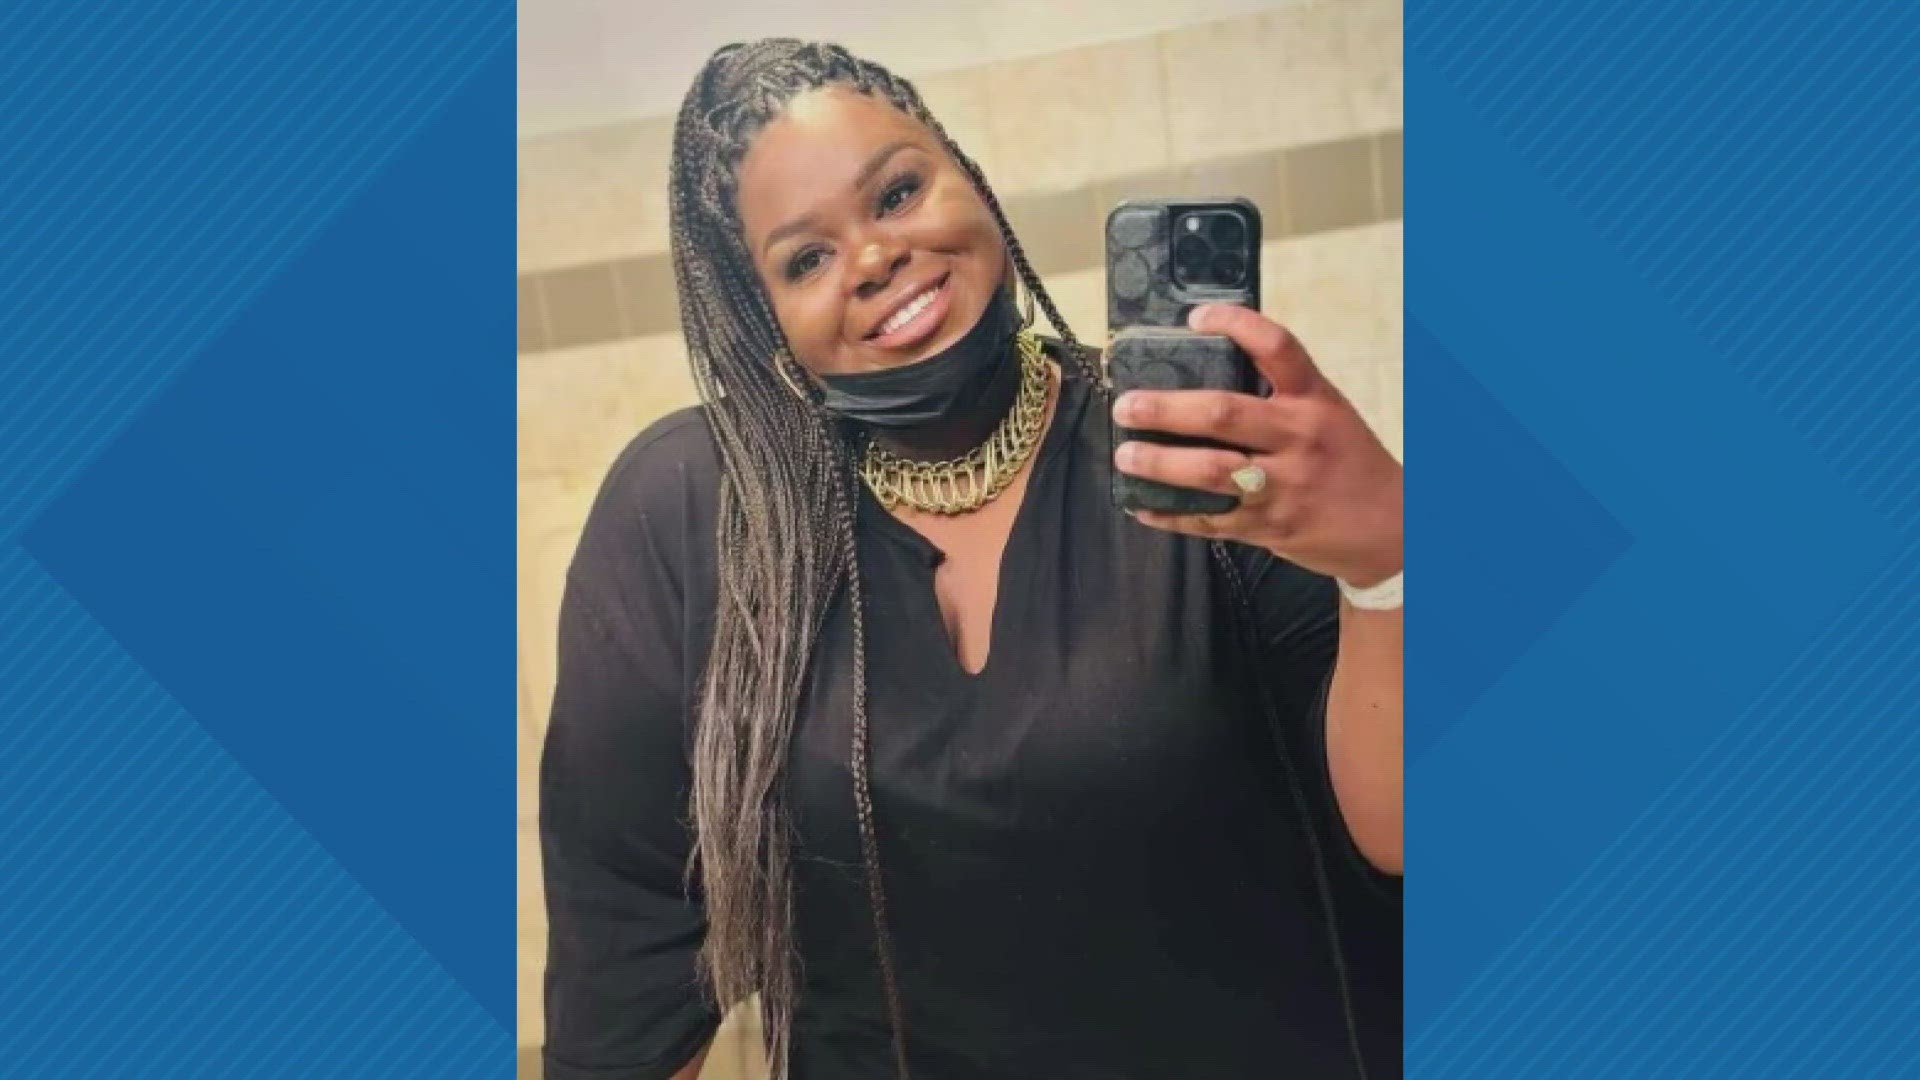 A woman from St. Louis was killed in a car crash in Indiana Tuesday. Zinyetta Z. Morgan, 24, was pronounced dead on the scene of a two-car crash in Terre Haute.